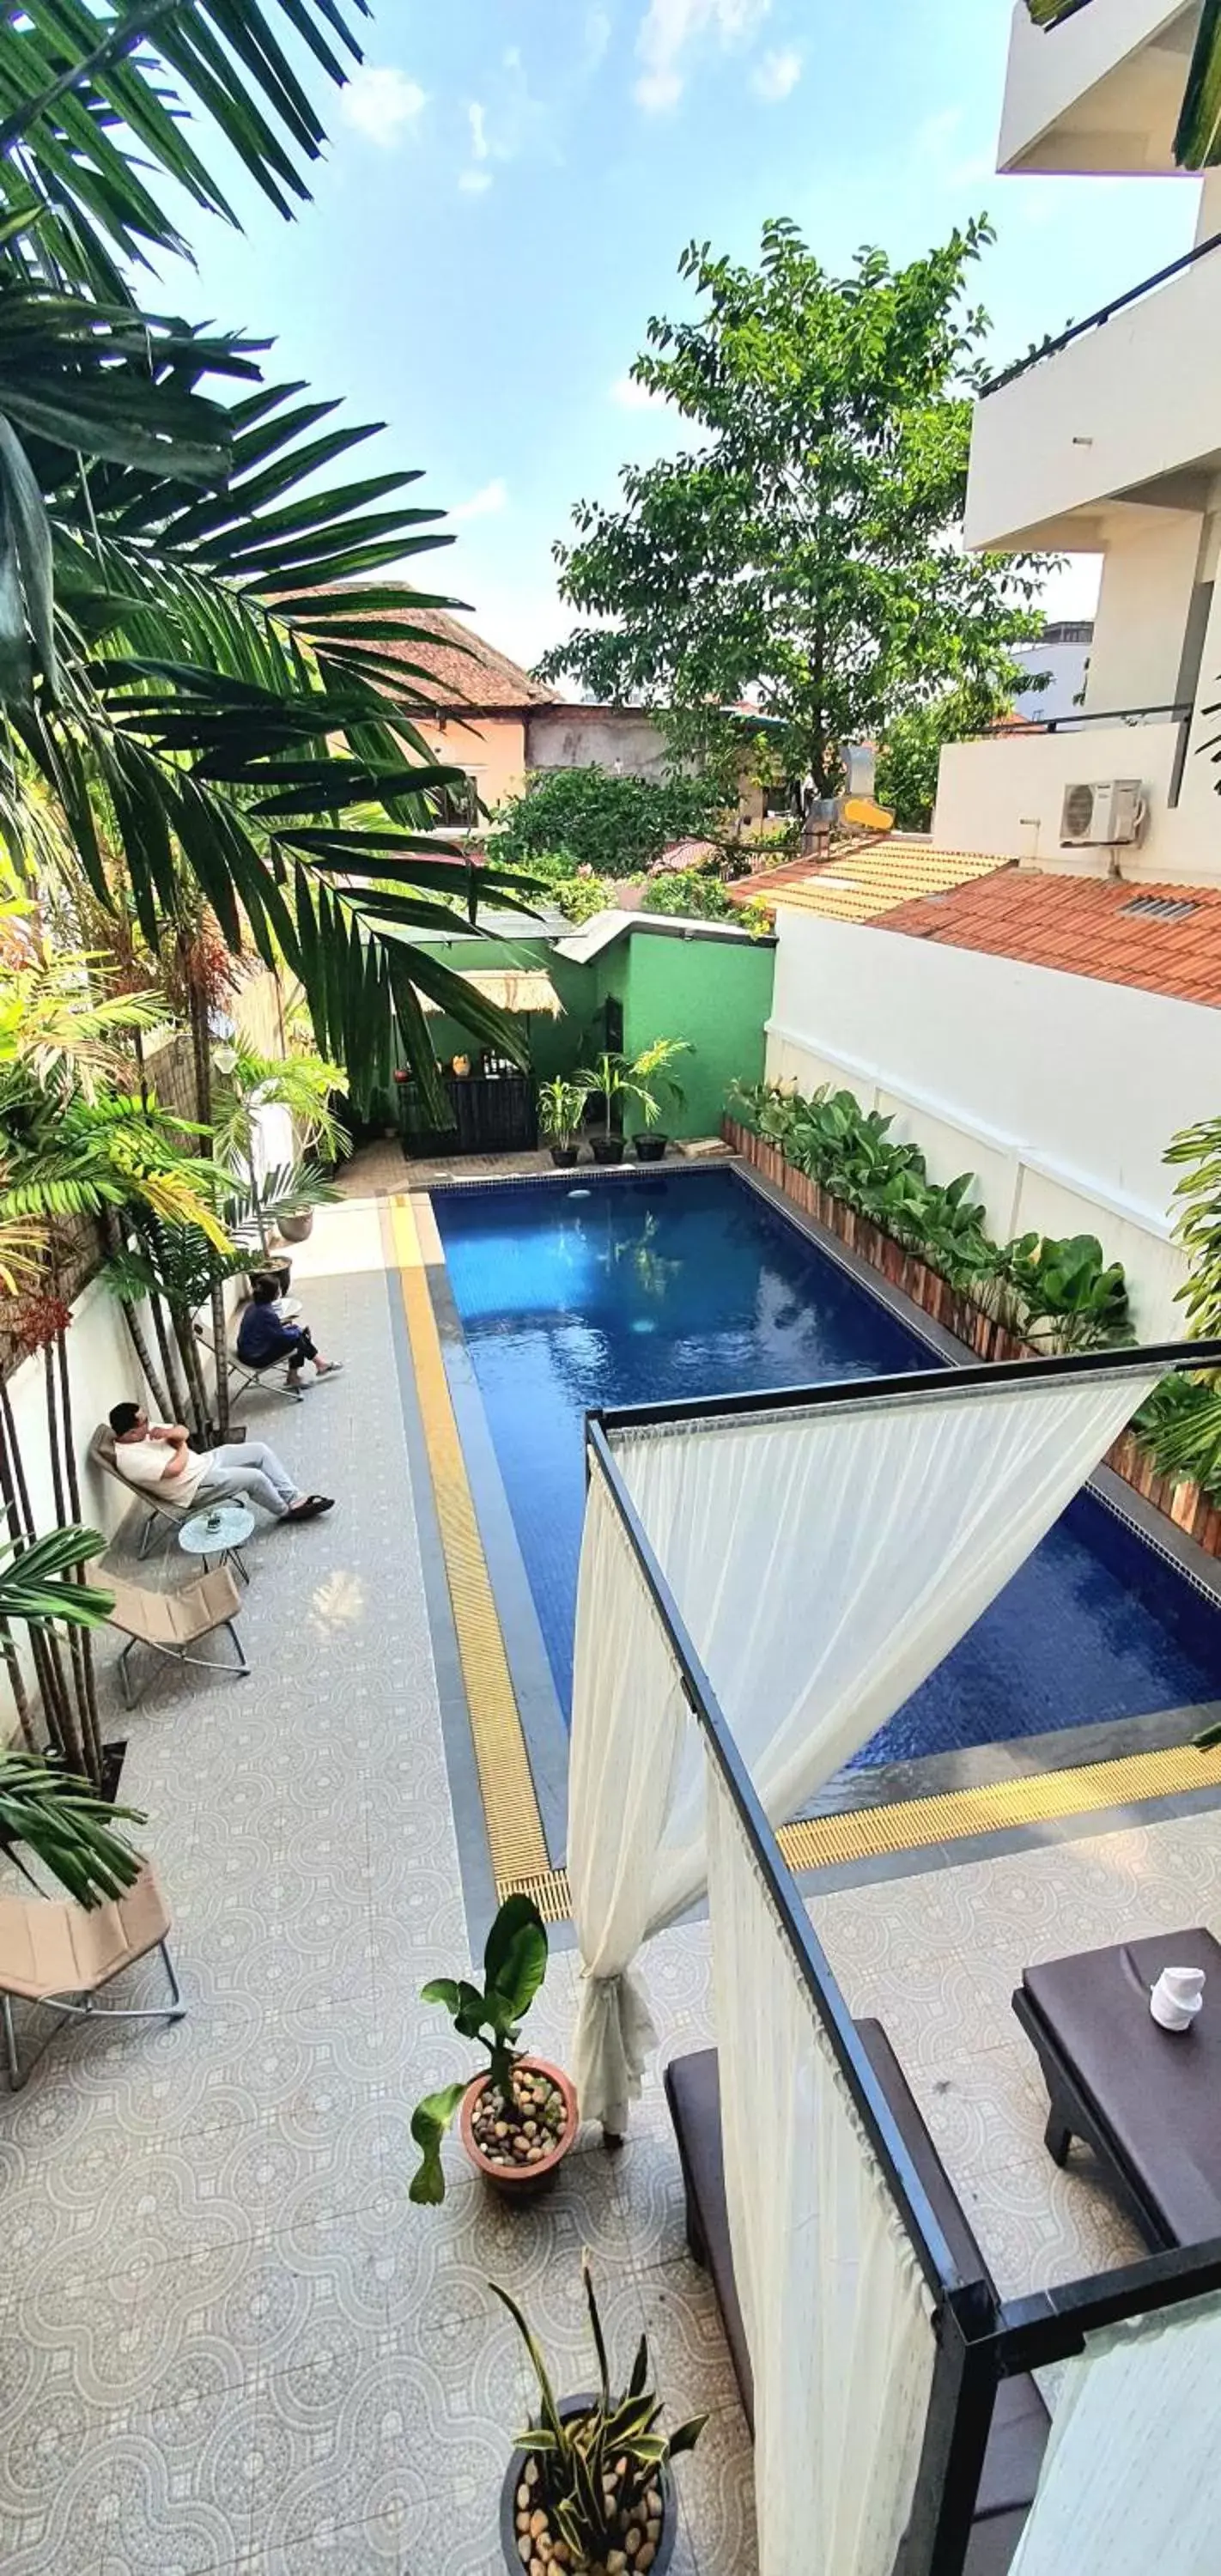 Pool View in Siem Reap Urban Boutique Hotel